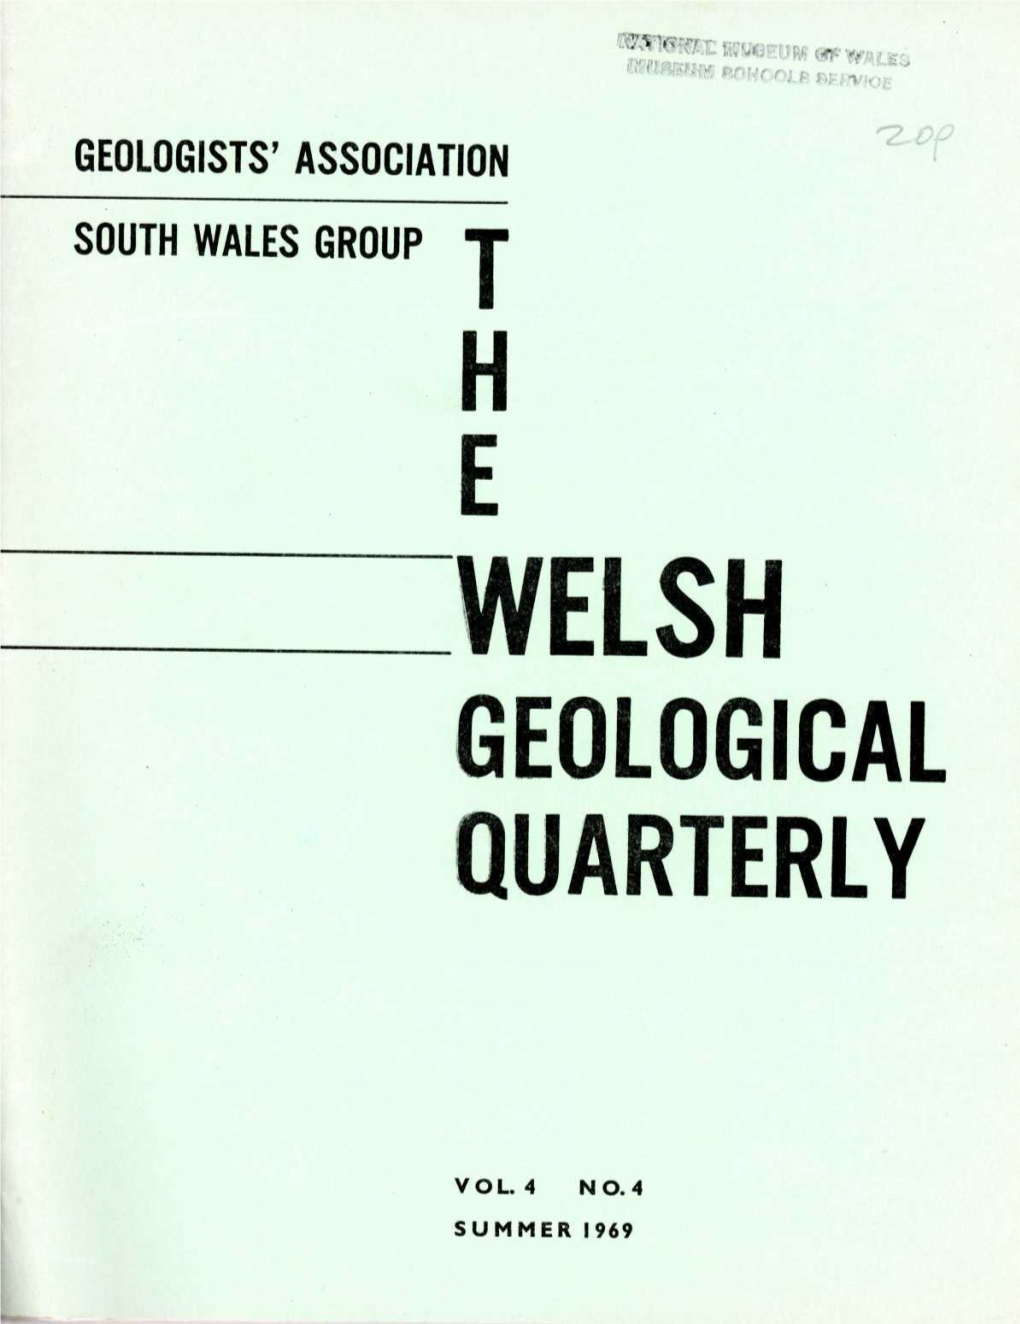 Summer 1969 the Geologists' Association: South Wales Group